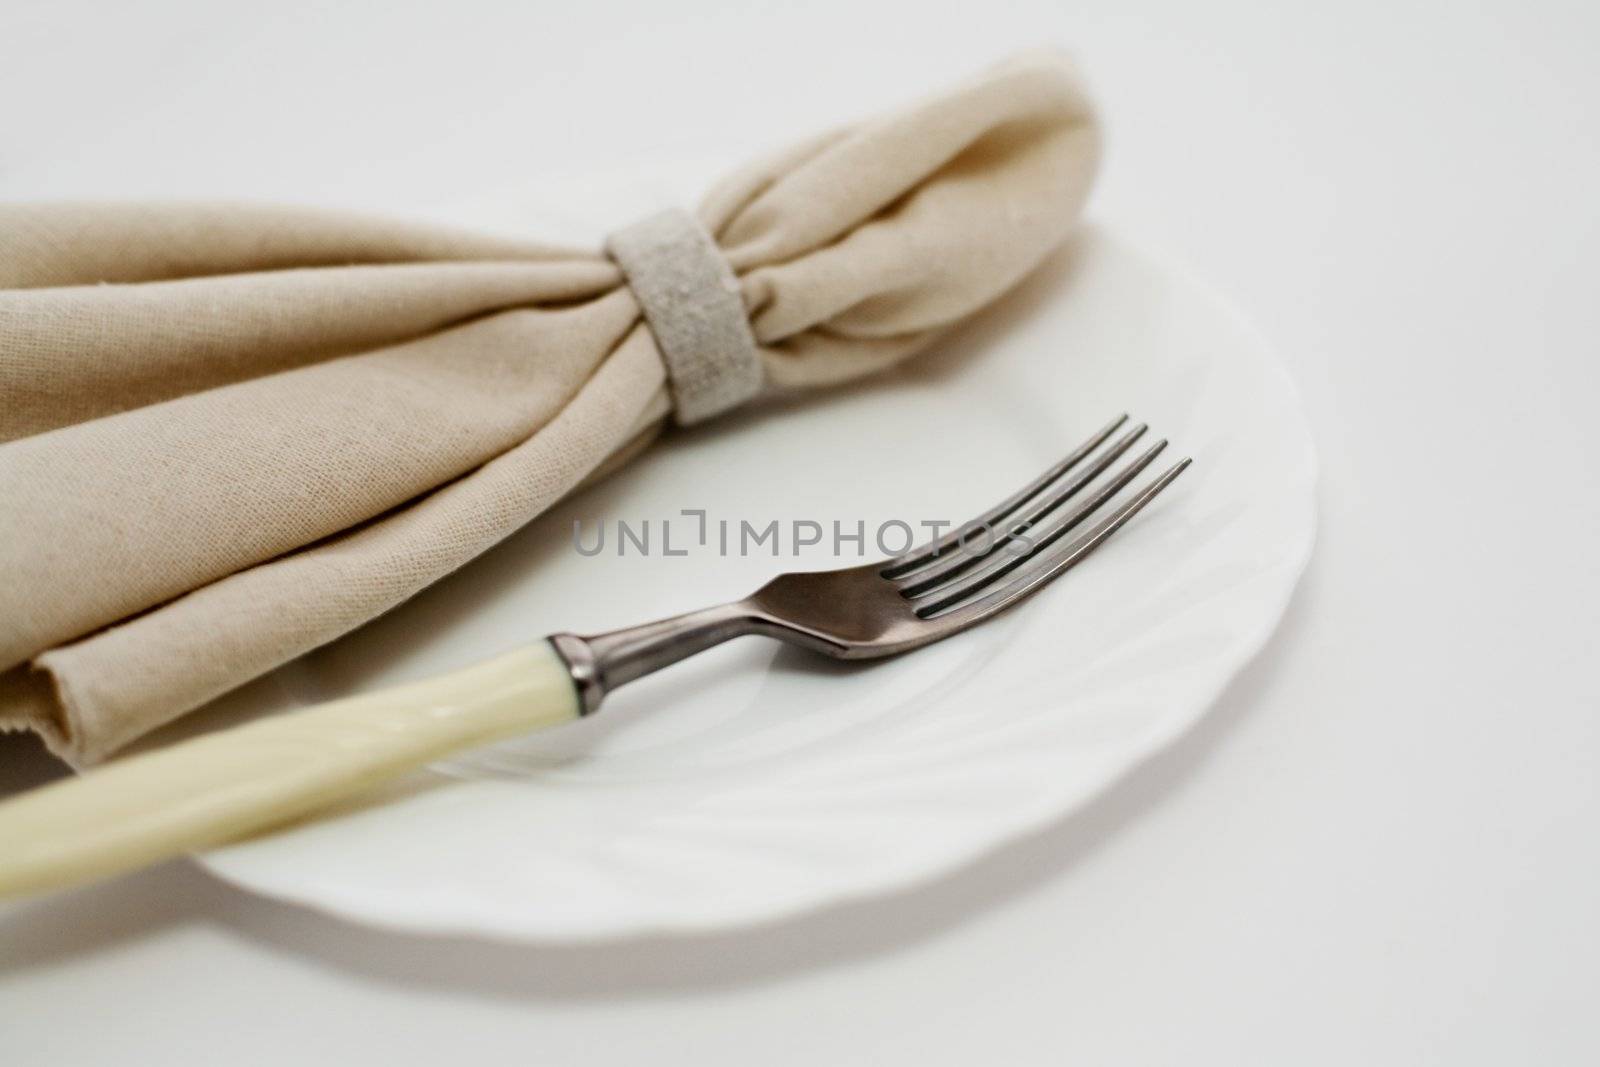 An image of fork and napkin on plate